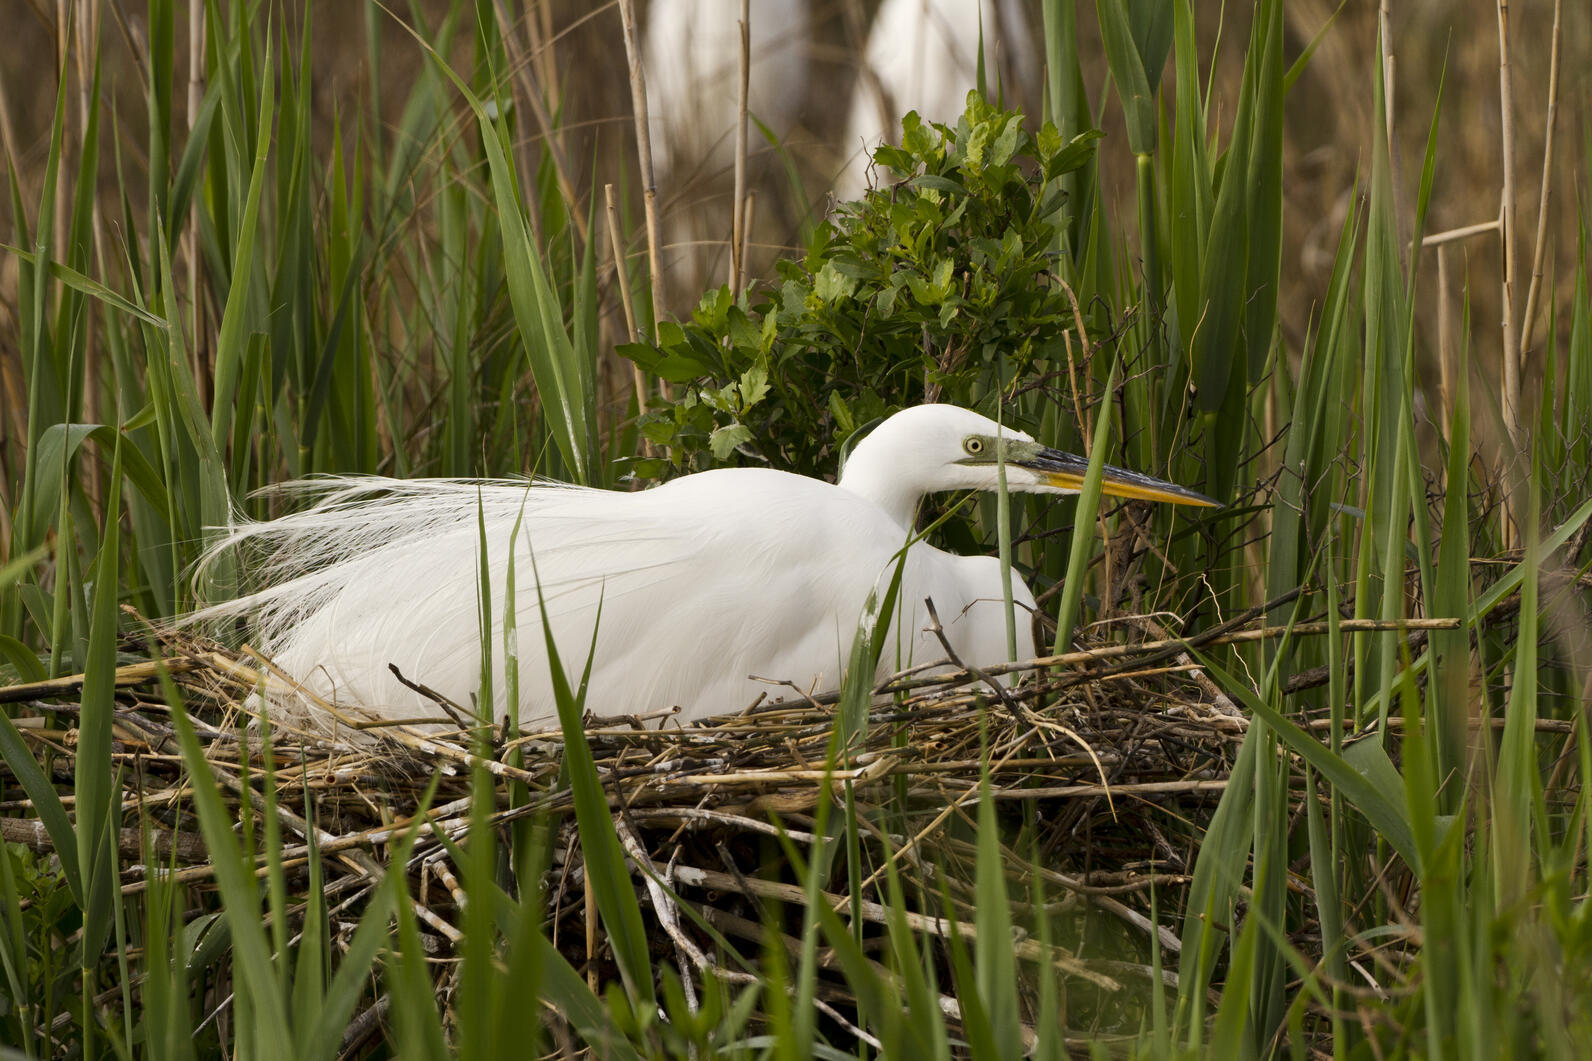 A white egret sits on a nest in tall grass.